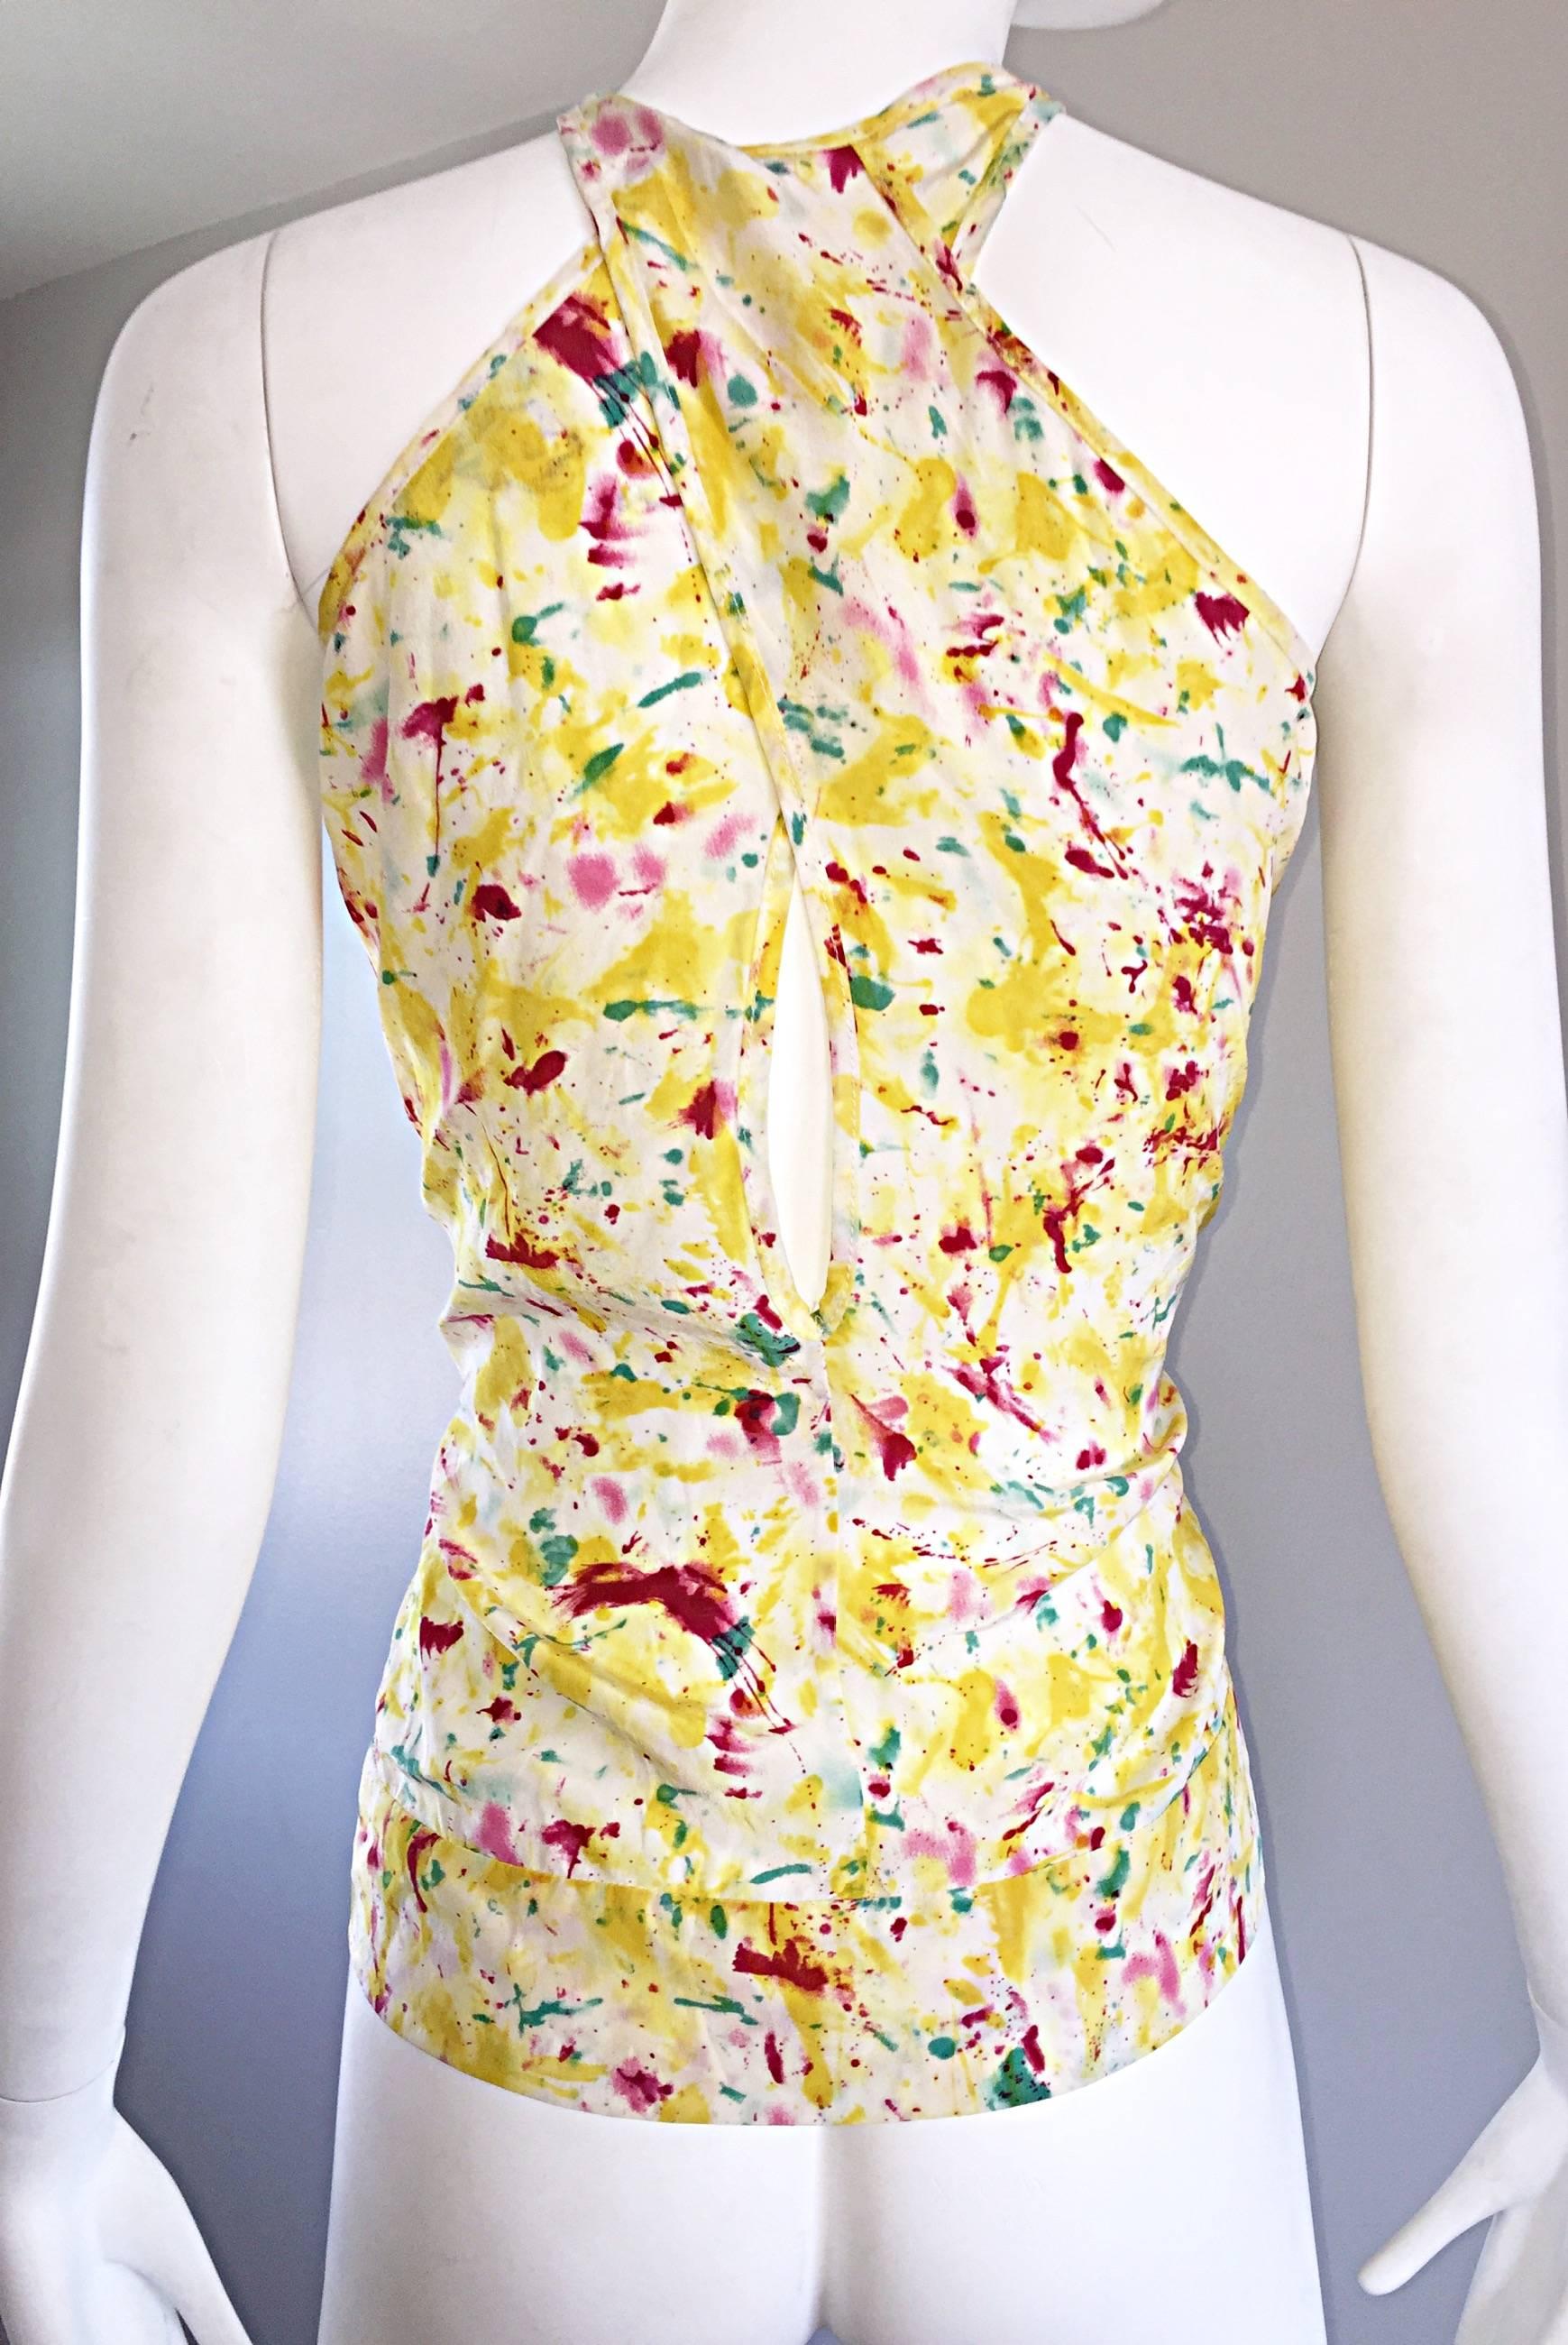 Chic 90s vintage EMILIO PUCCI silk sleeveless top from the 'Splatter Paint' Collection! Ivory white background with vibrant pink, yellow, green, and teal throughout. Peek-a-boo slit at criss-cross back. Flattering fit that looks fantastic slouchy or